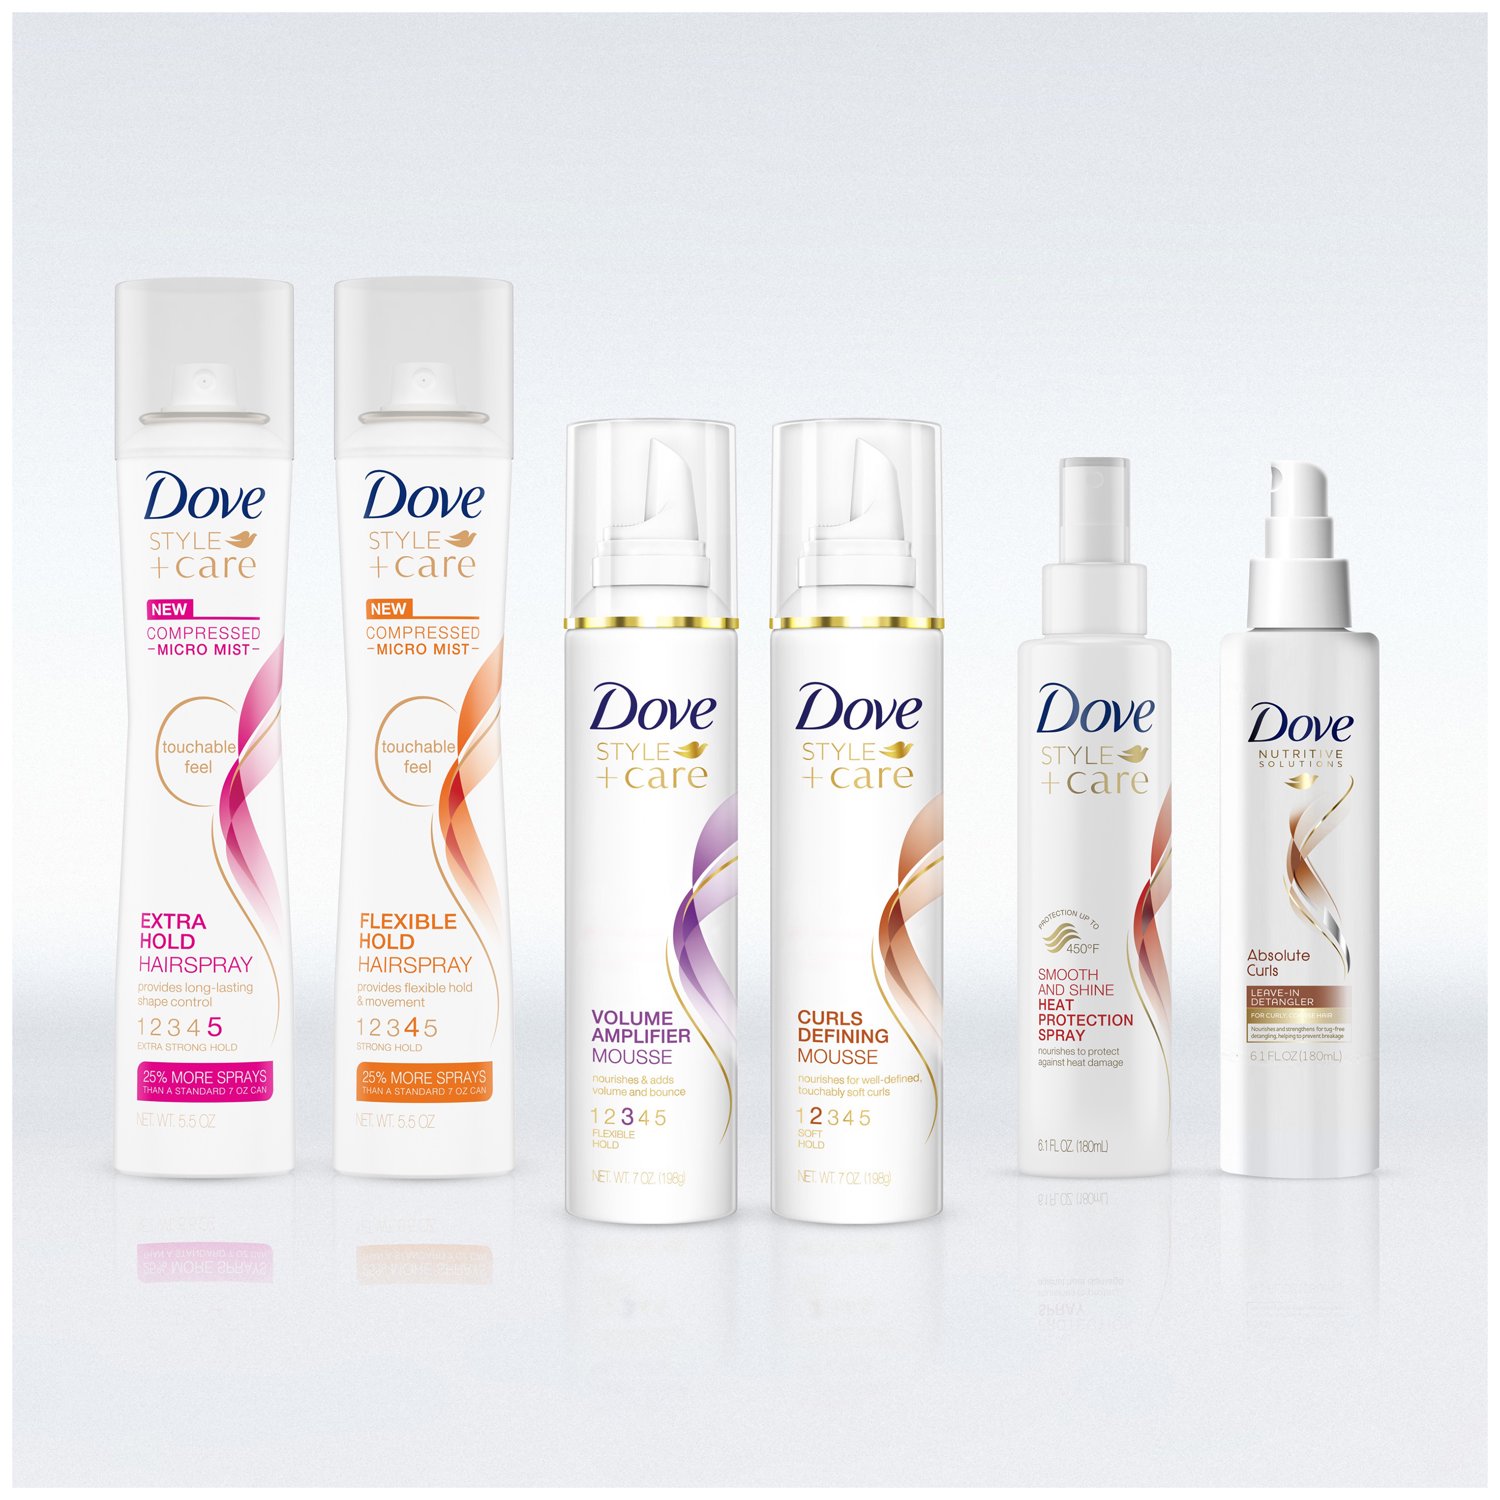 Dove Style+Care Compressed Micro Mist hairspray, 5.5 oz - image 4 of 8